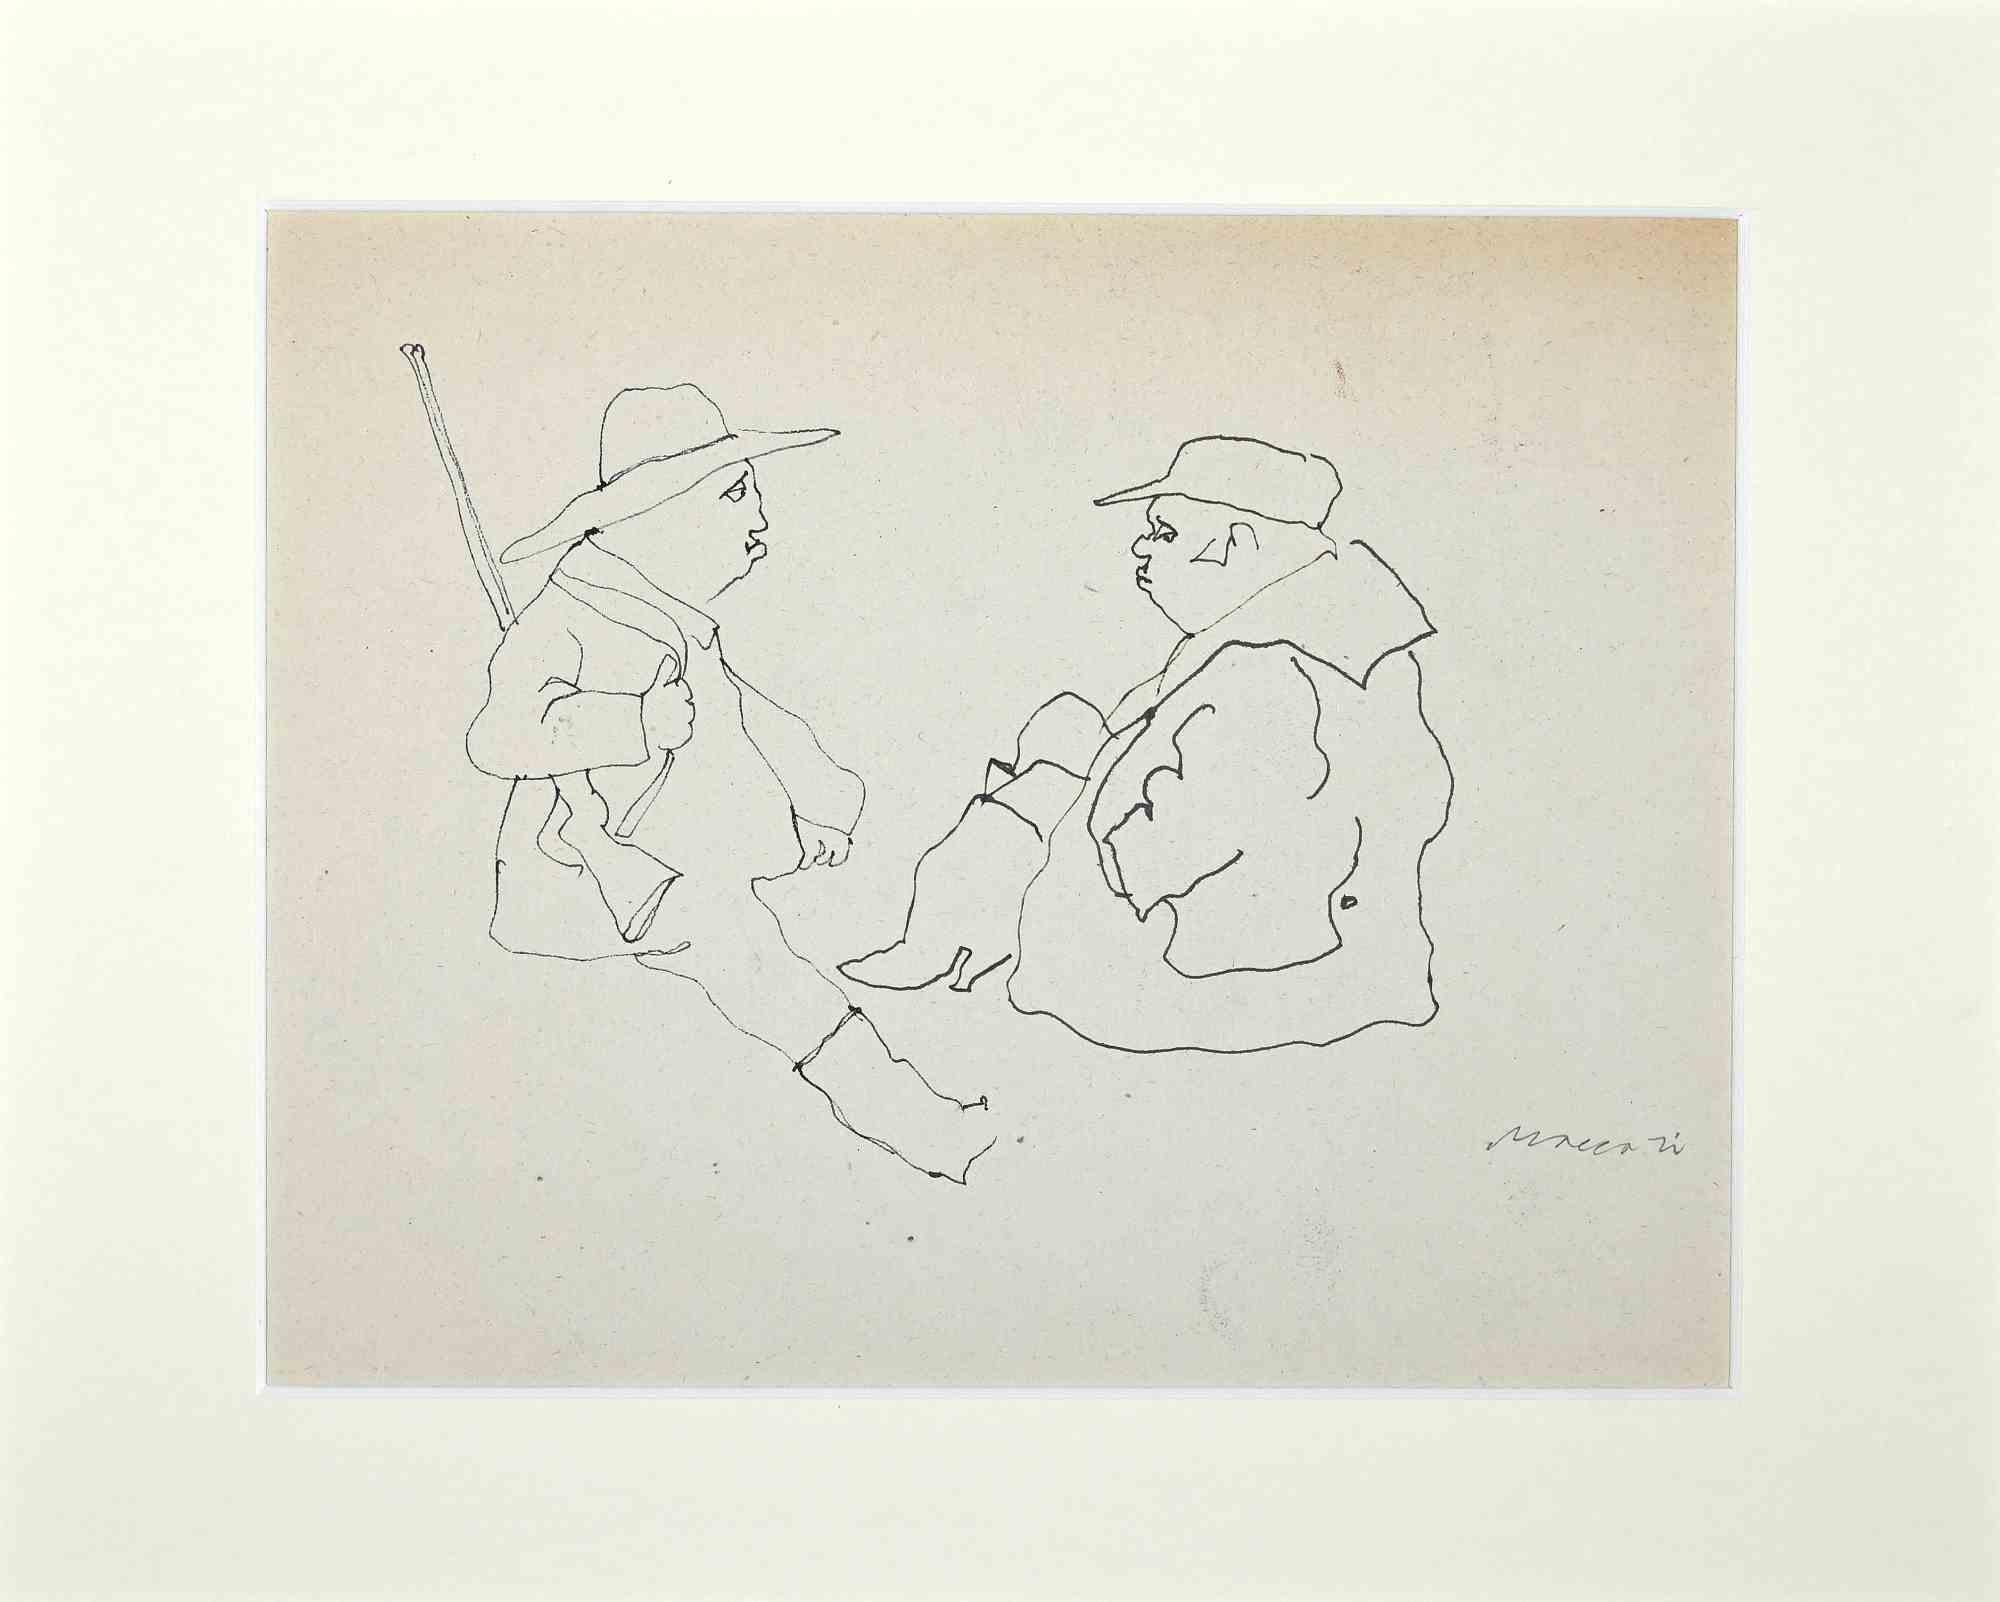 Hunters is an original drawing in china ink on paper, realized in the Mid-20th Century by the great Italian artist and journalist, Mino Maccari (Siena, 1898 - 1989).

Signed "Maccari" in pencil on the lower right margin.

With the incredible satiric